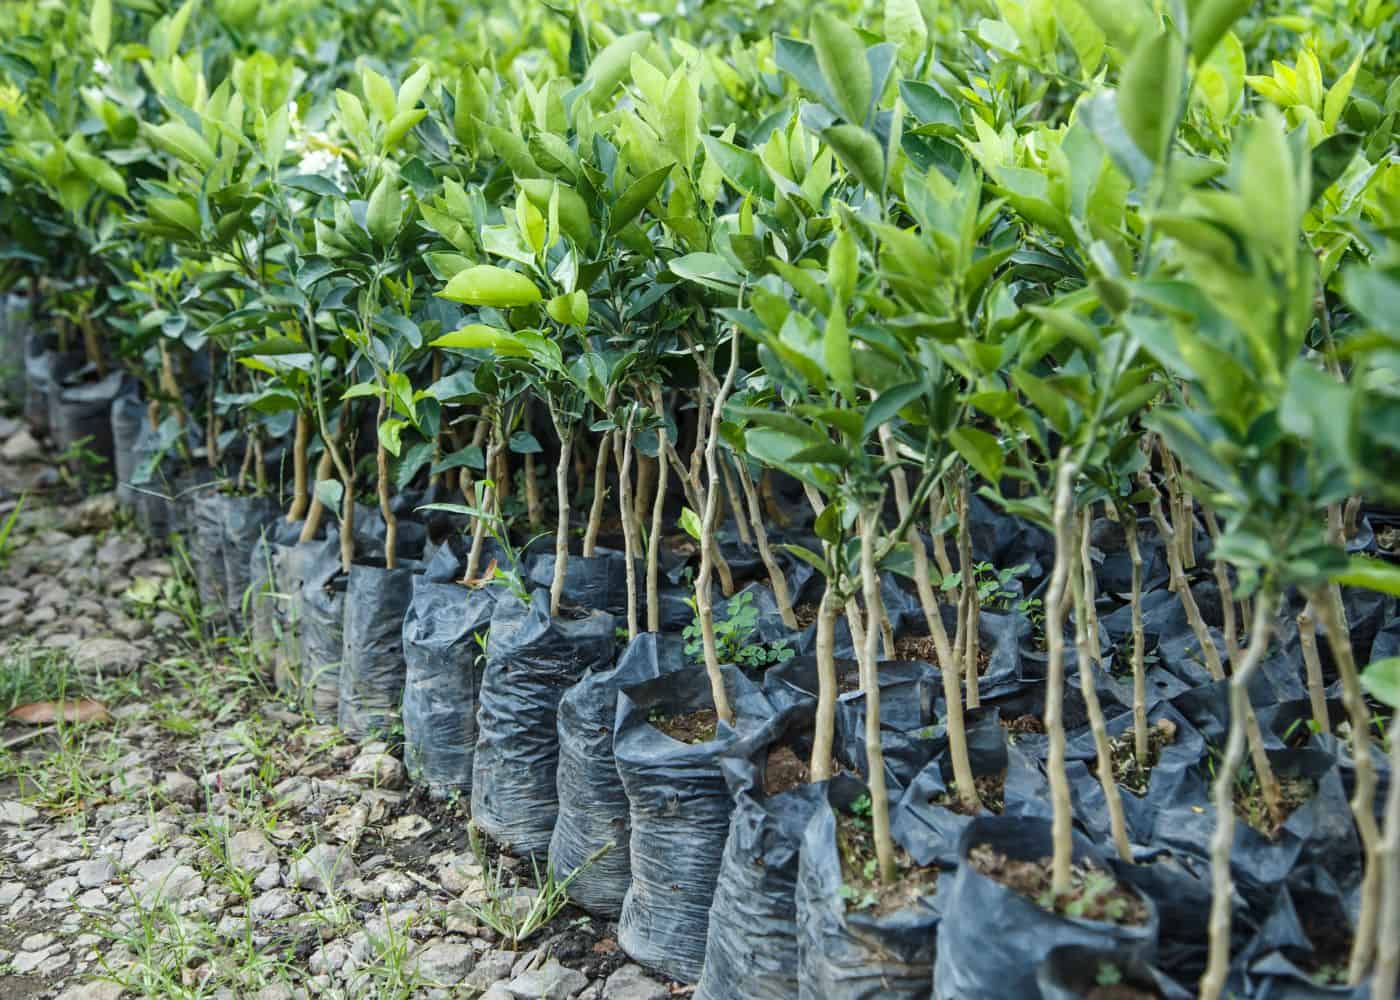 Young lemon trees at a plant nursery